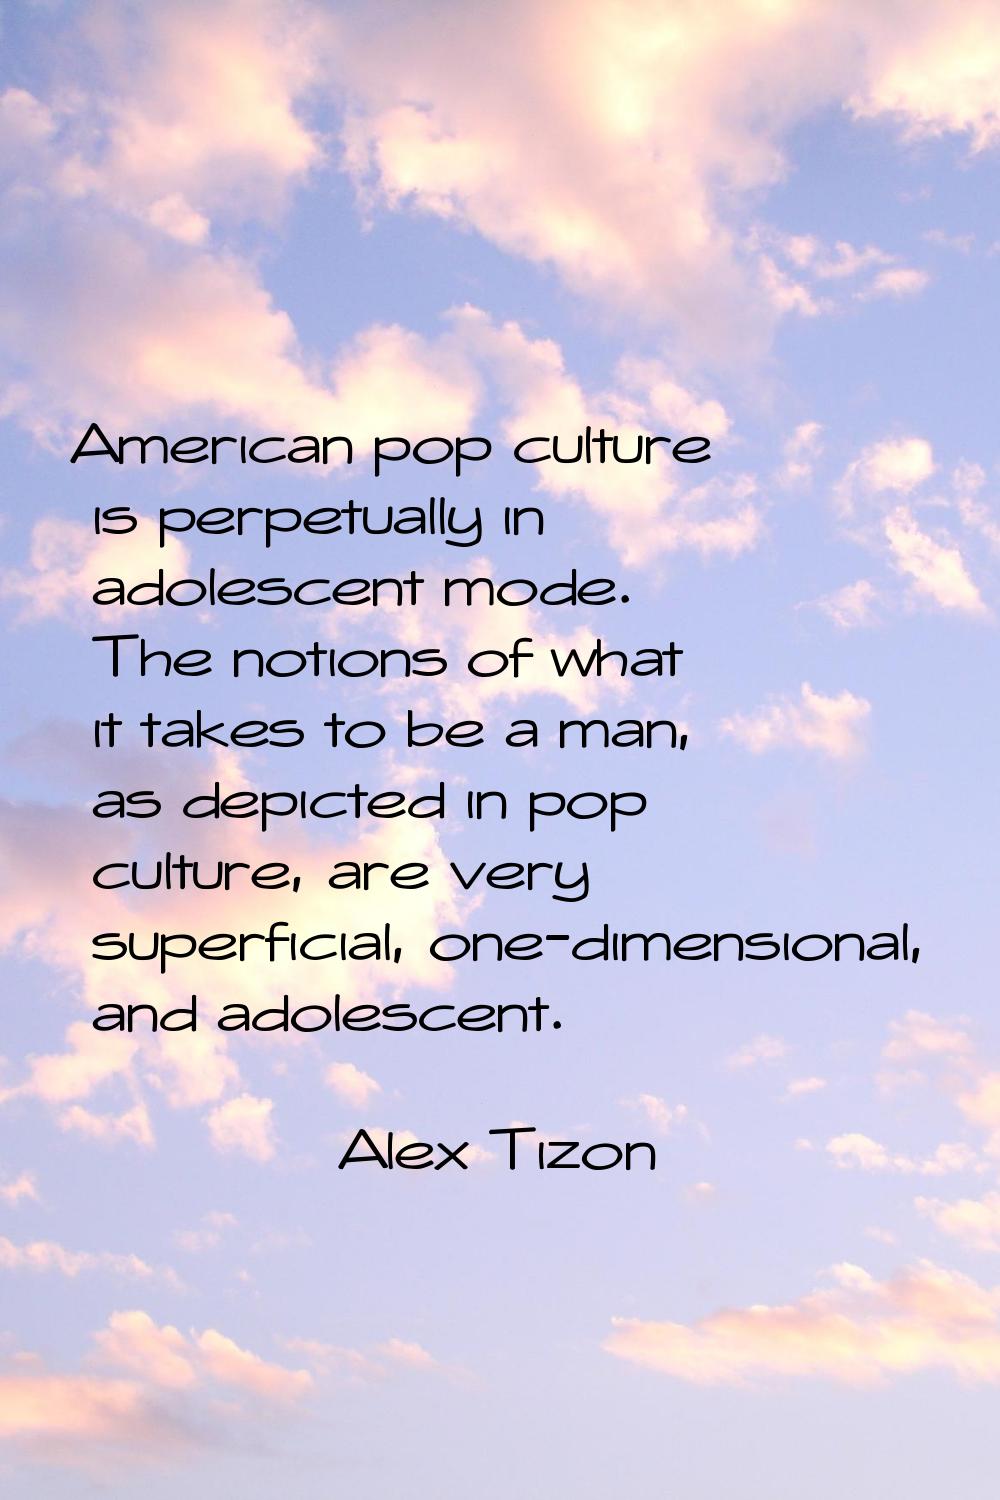 American pop culture is perpetually in adolescent mode. The notions of what it takes to be a man, a